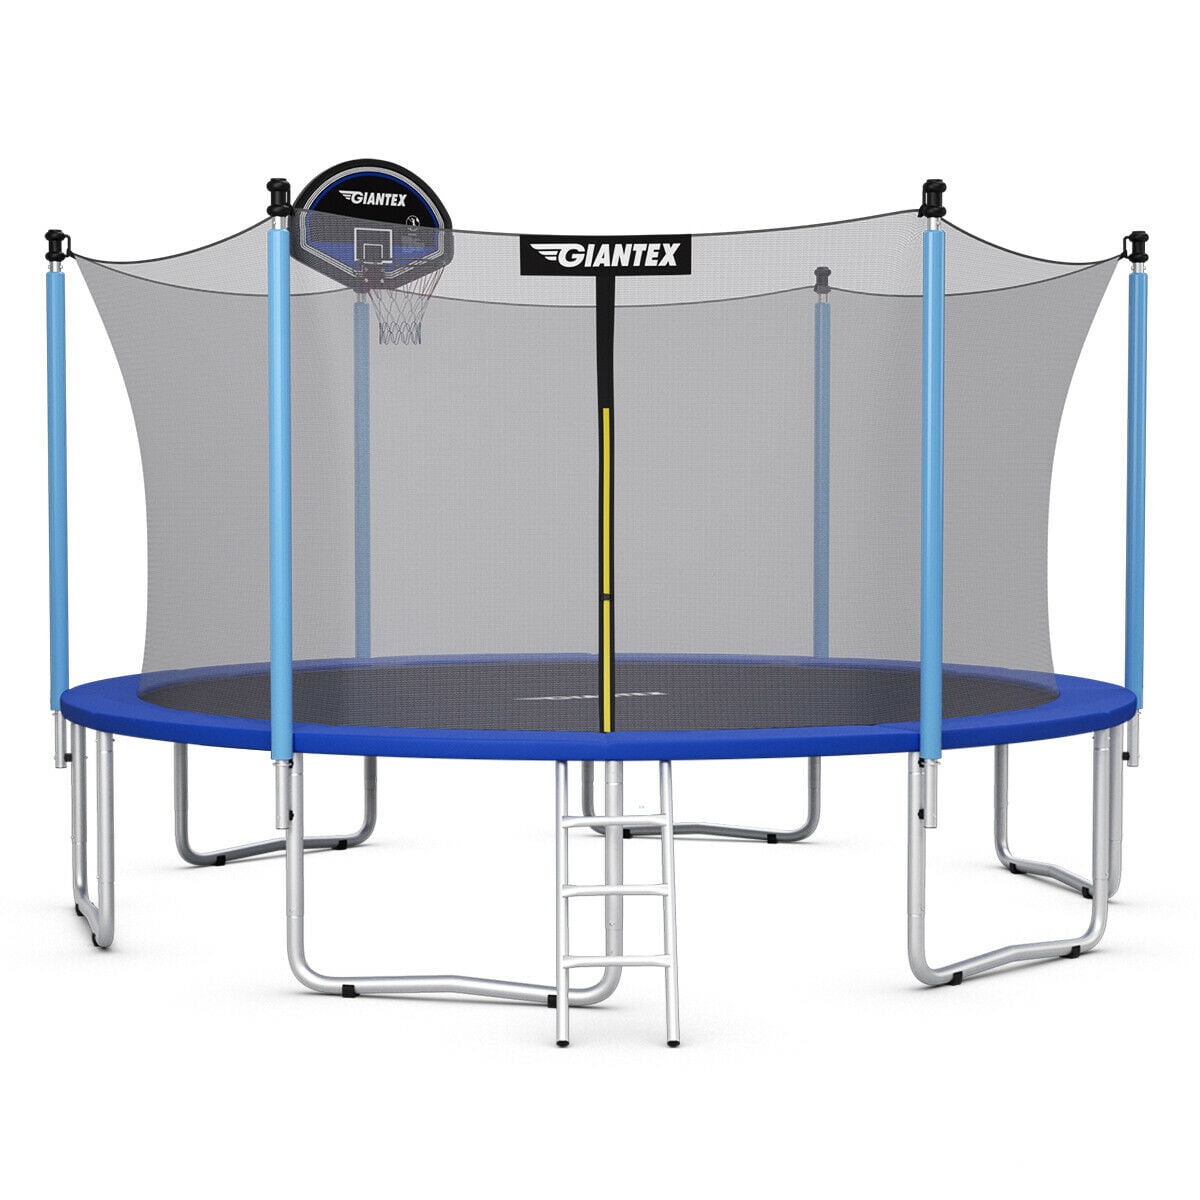 Topbuy 15 Feet Trampoline Combo Bounce Jump Safety Enclosure Net With Basketball Hoop Ladder